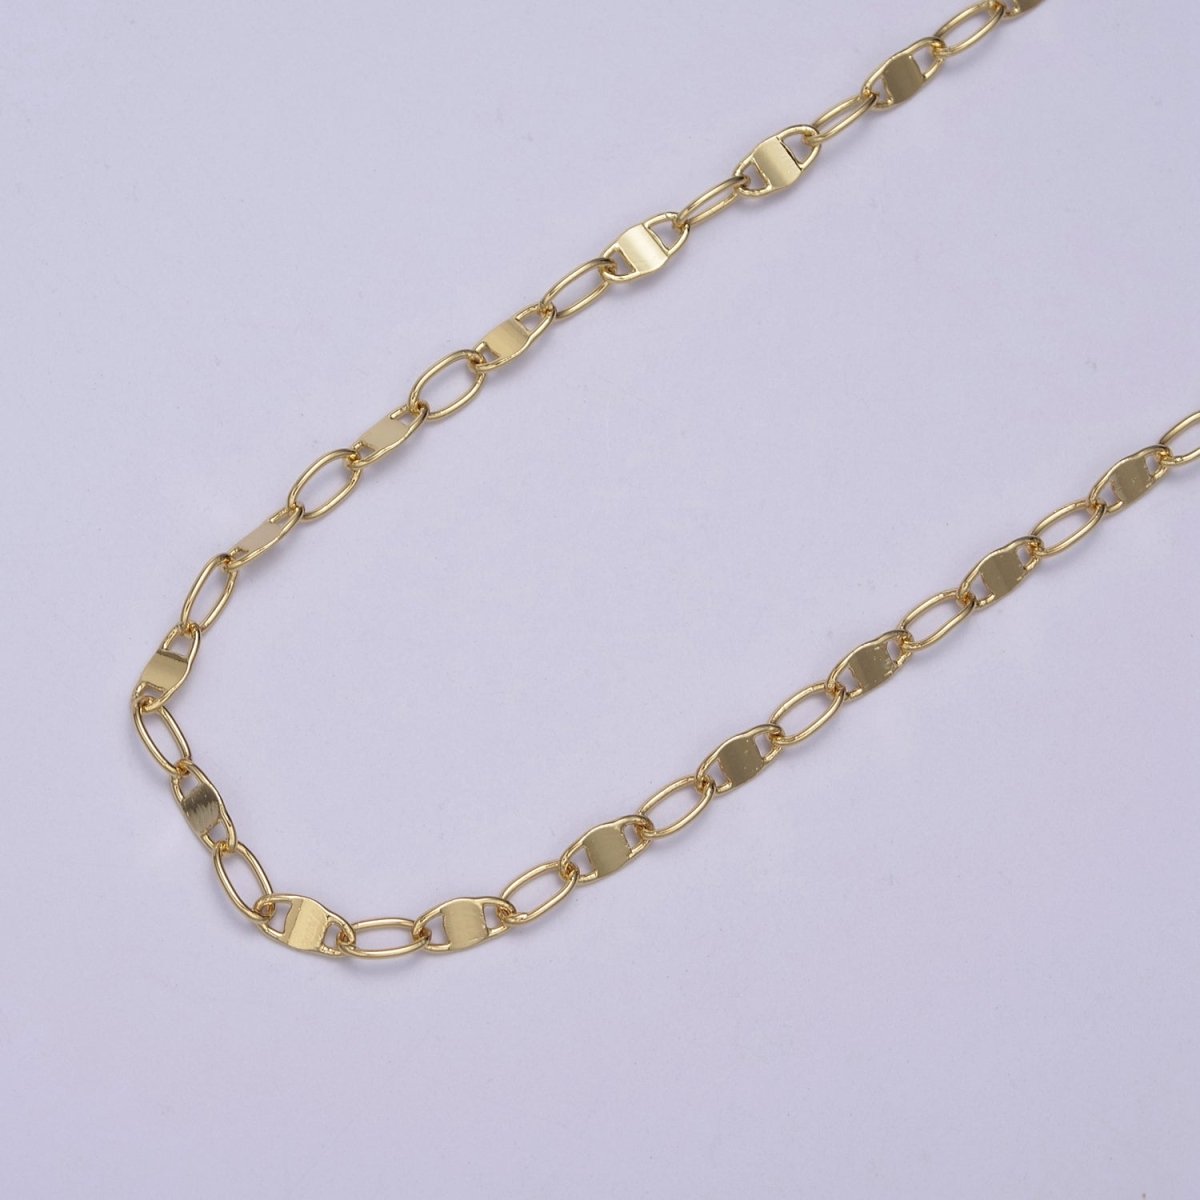 Dainty 24K Gold Filled Scroll Chain with 3mm Width in Gold & Silver, Unfinished Chain For Jewelry Making | ROLL-660, ROLL-661 Clearance Pricing - DLUXCA